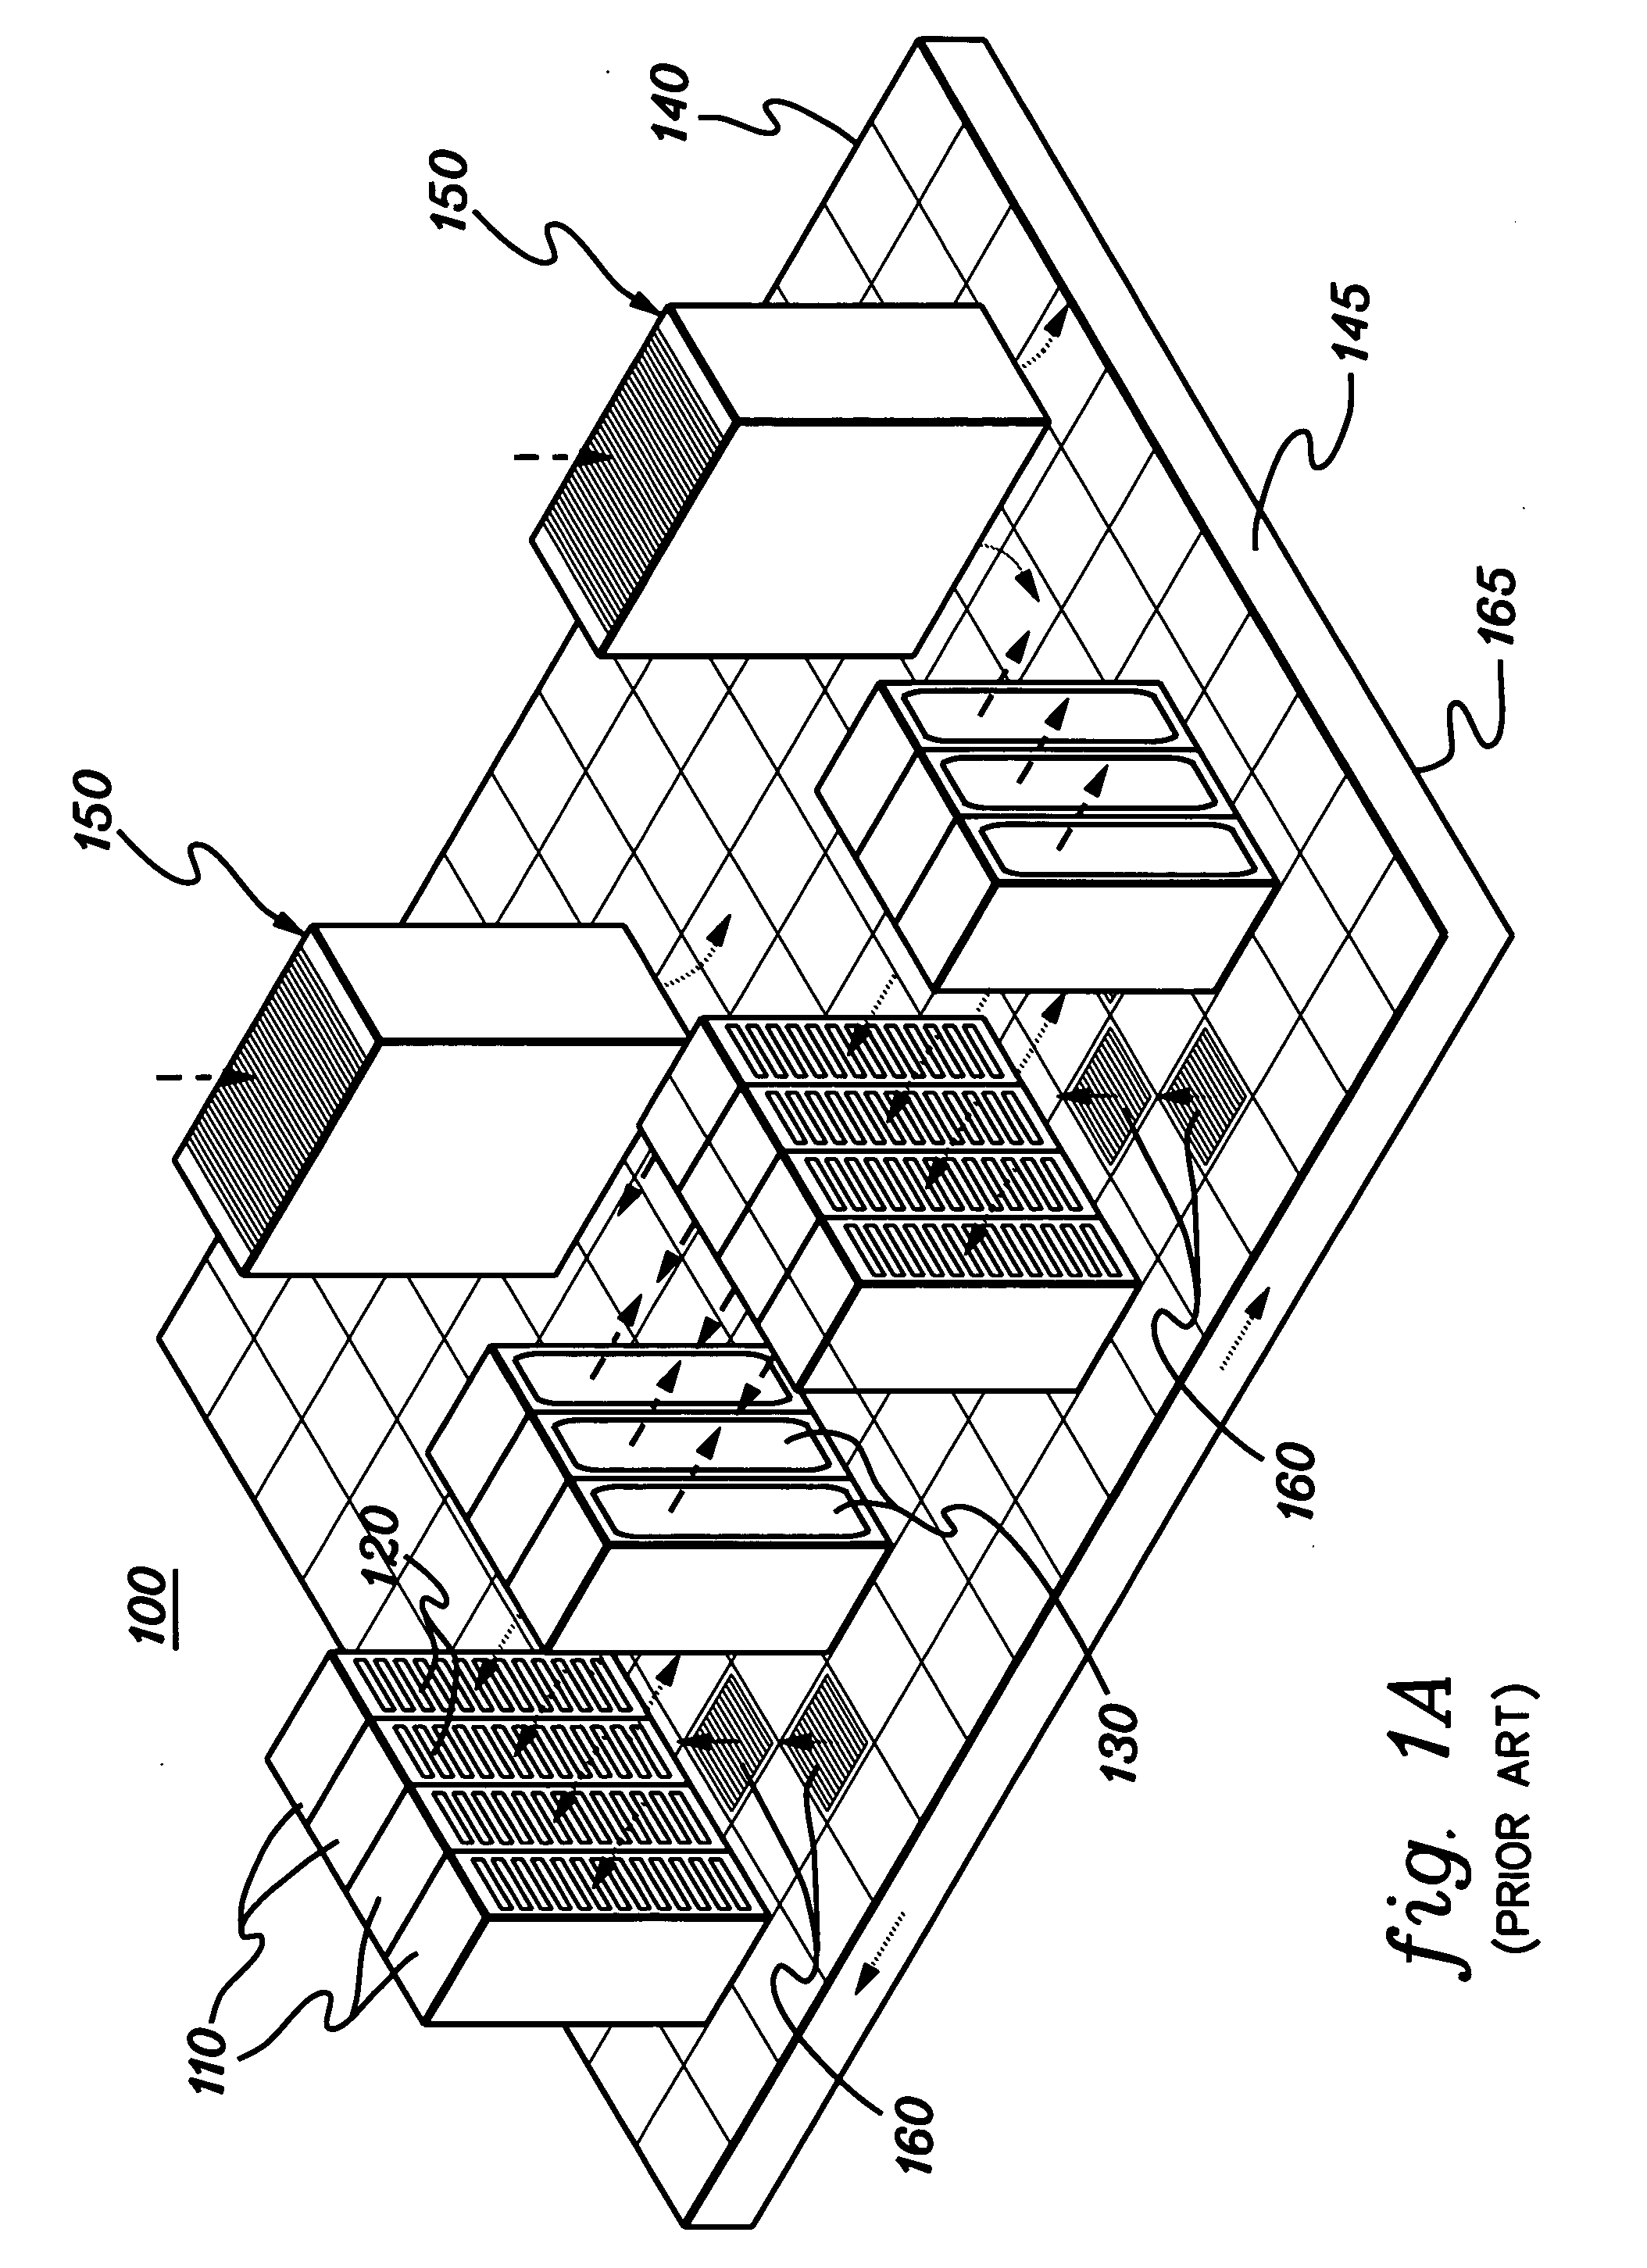 Apparatus and method for facilitating cooling of an electronics rack by mixing cooler air flow with re-circulating air flow in a re-circulation region